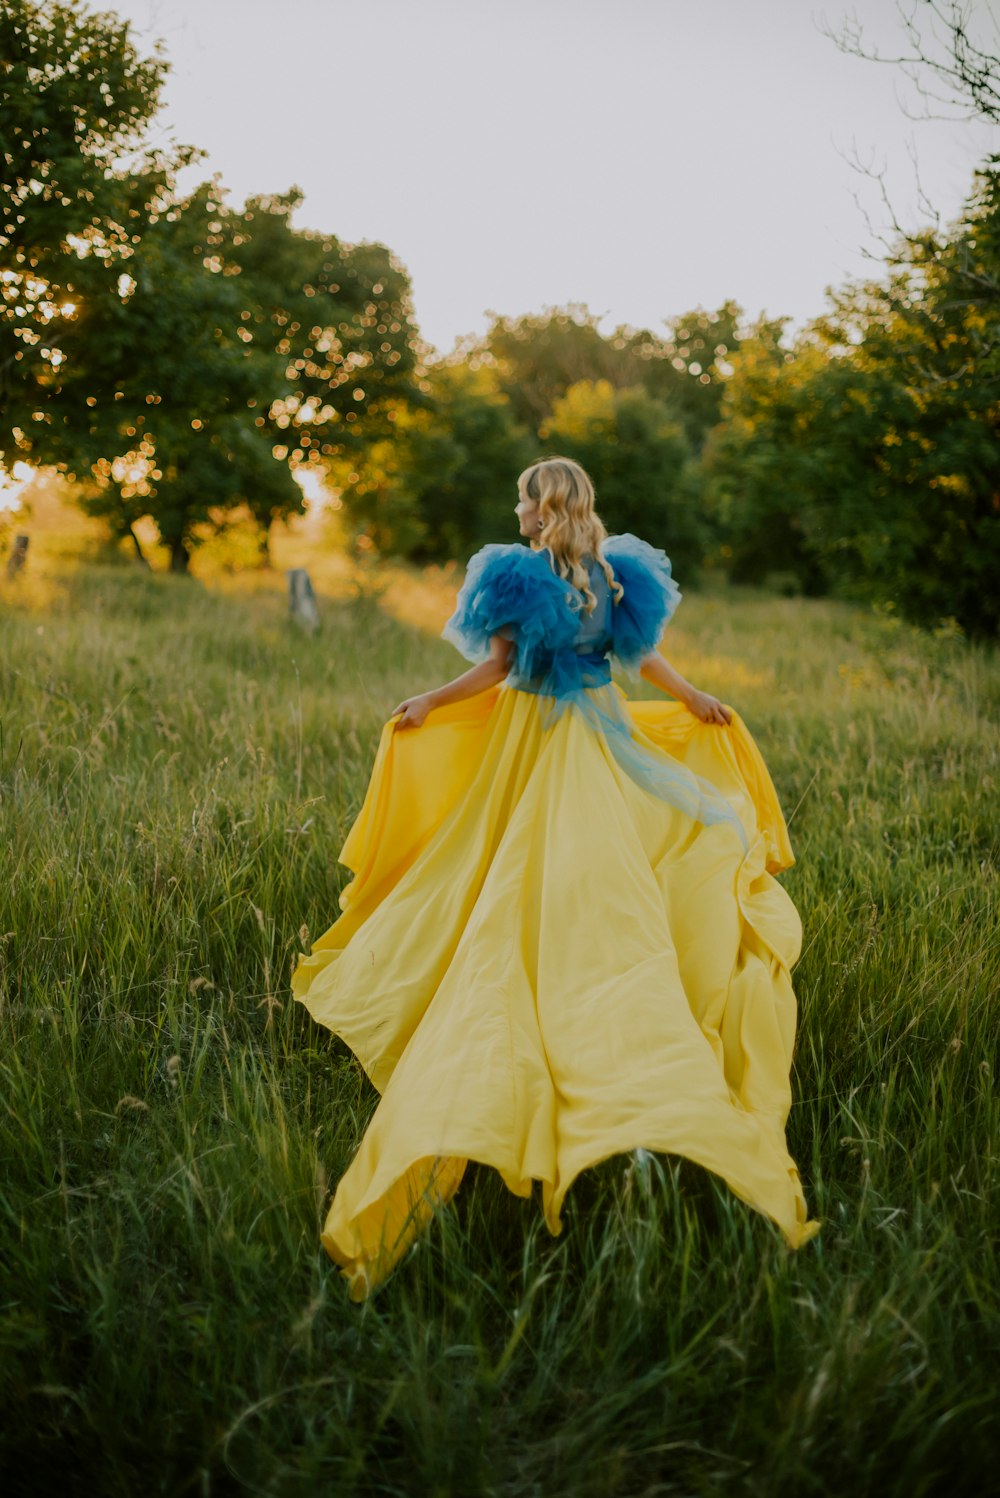 a person in a yellow dress in a grassy field